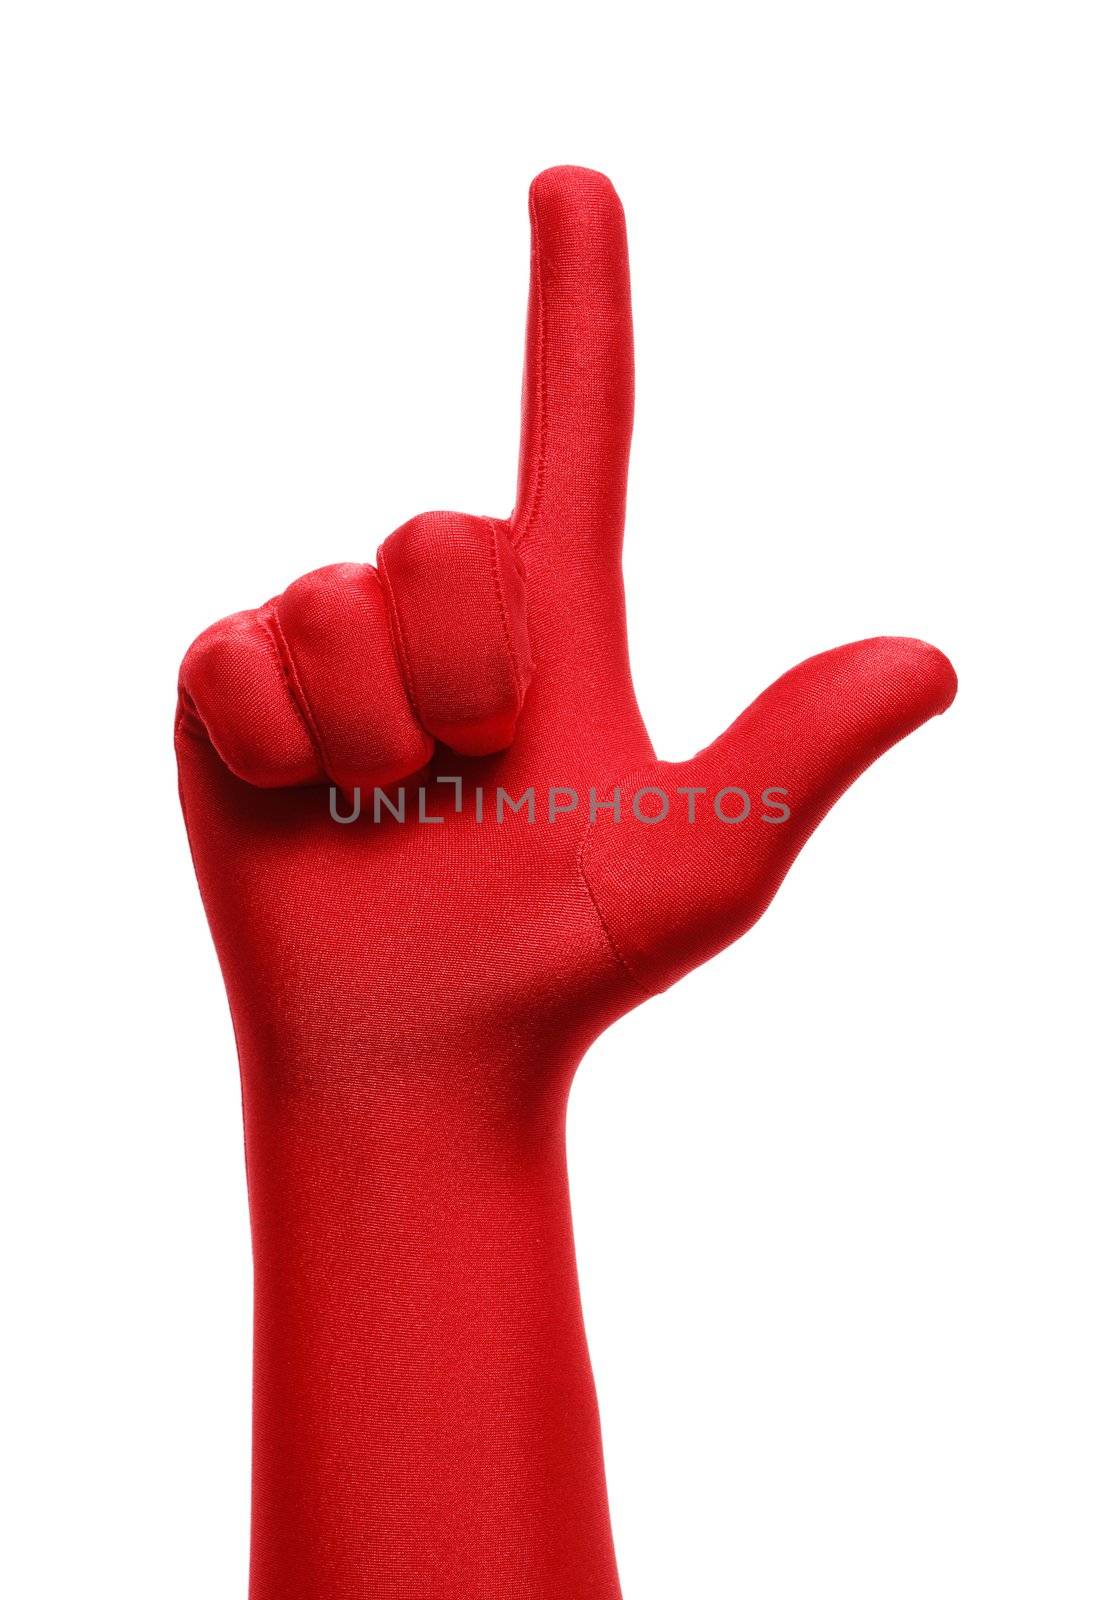 Strange hand with red glove pointing with a finger